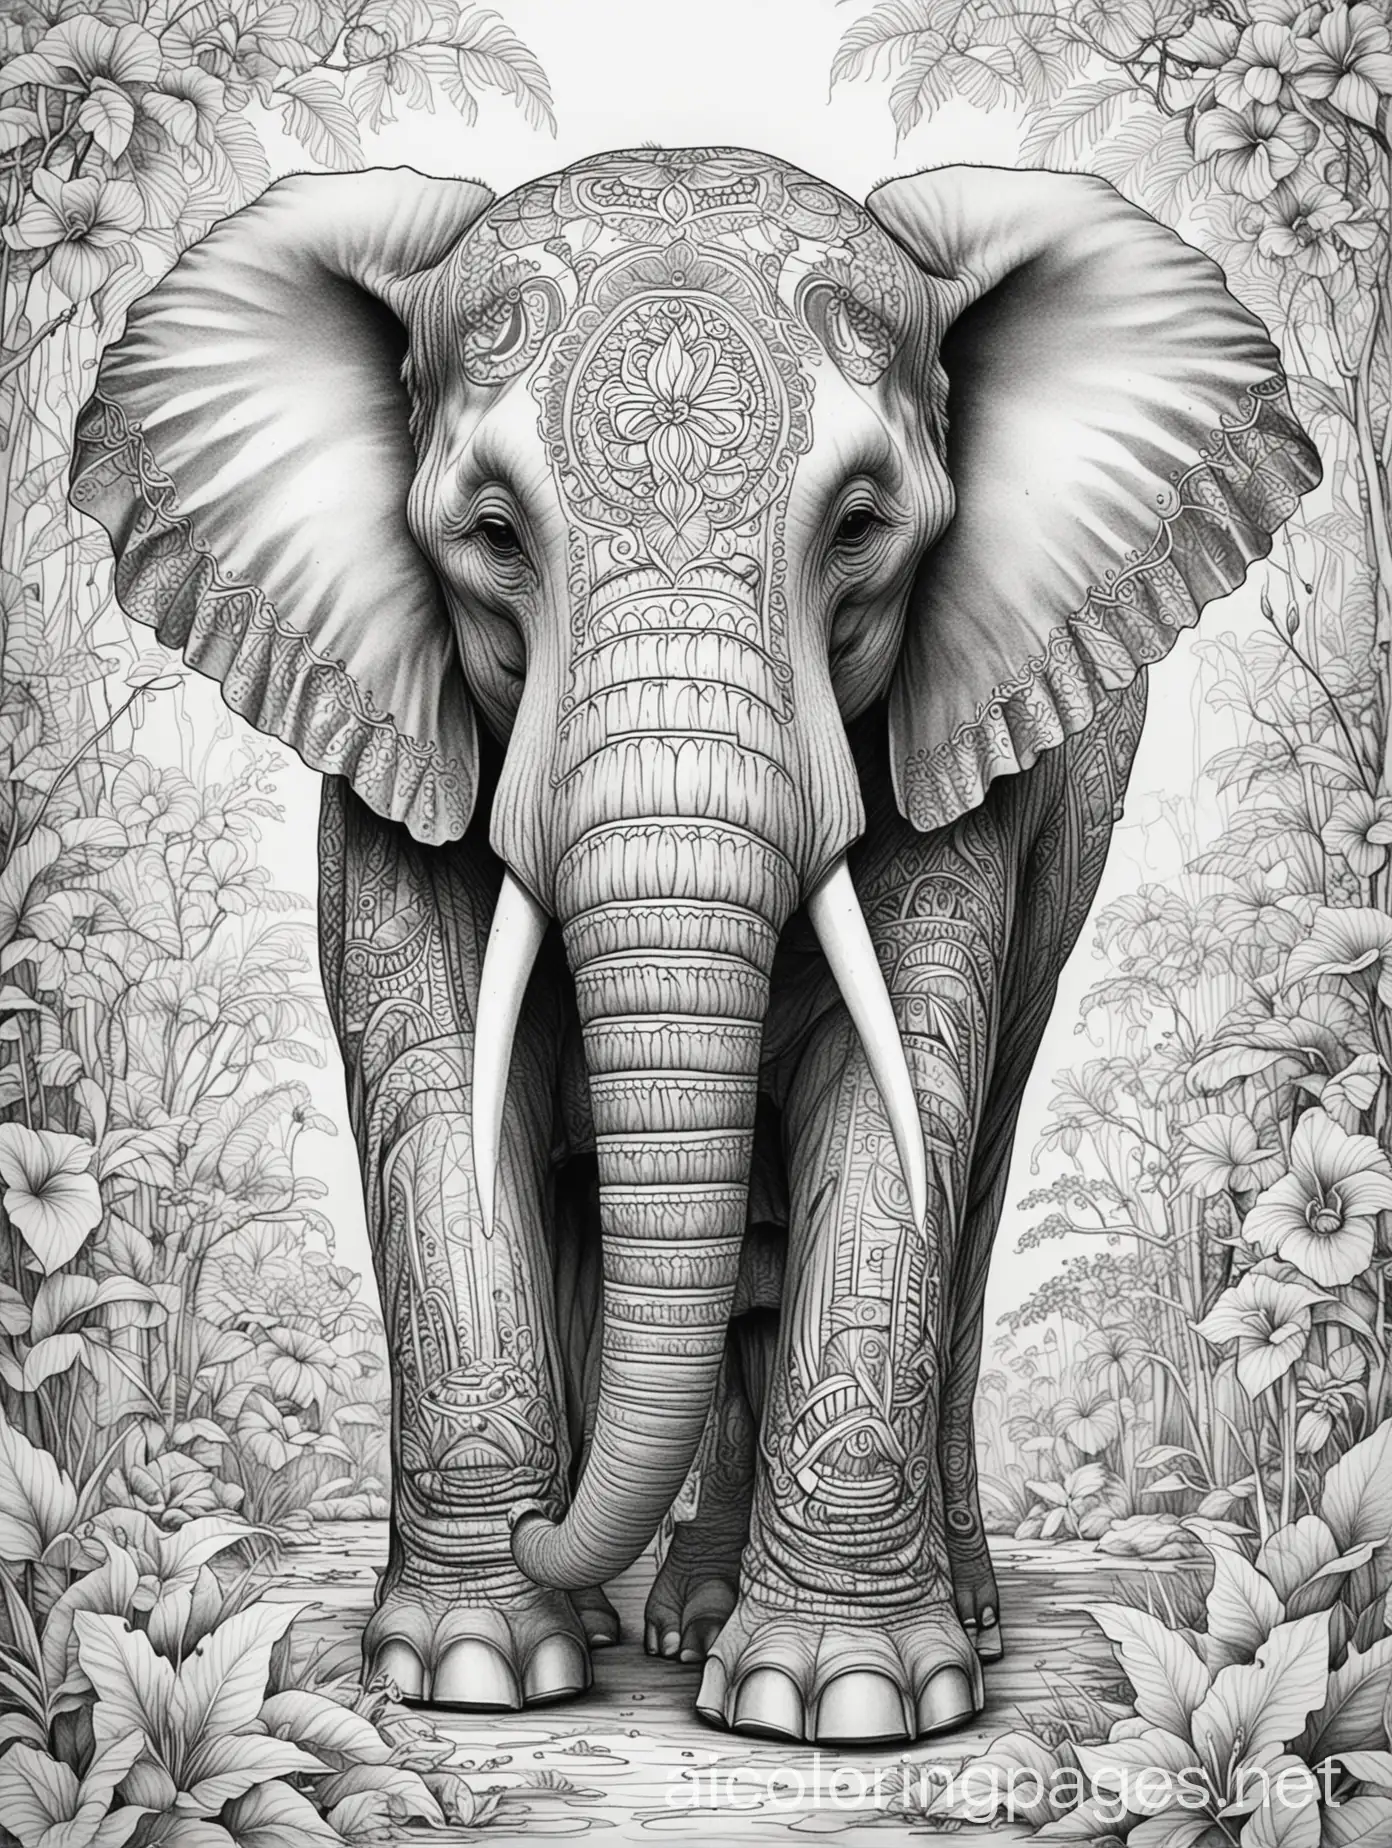 Majestic-Elephants-in-Jungle-Fantasy-Coloring-Page